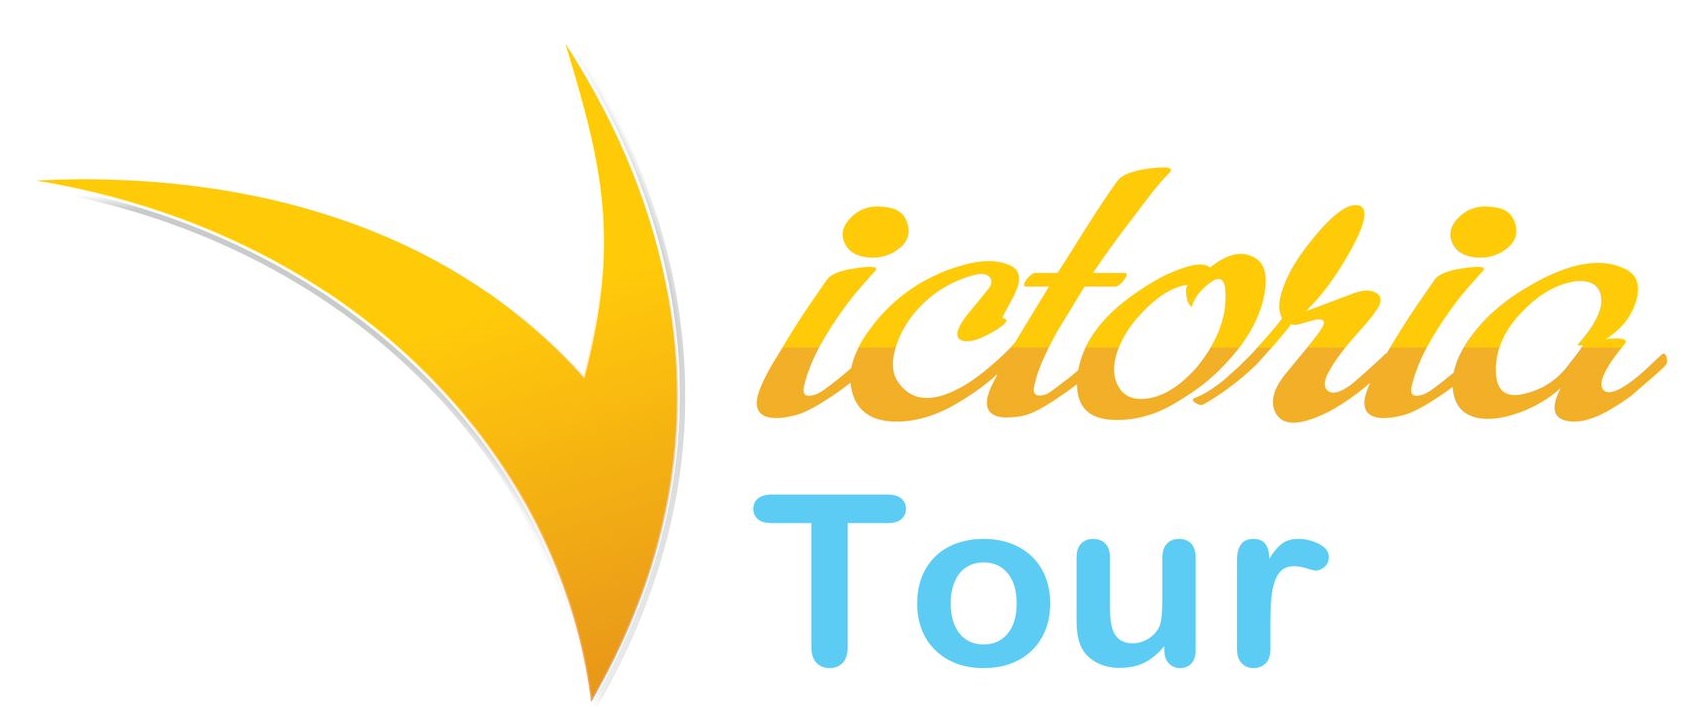 Victoriatour — Discover the wonders about tour, travel, booking hotel